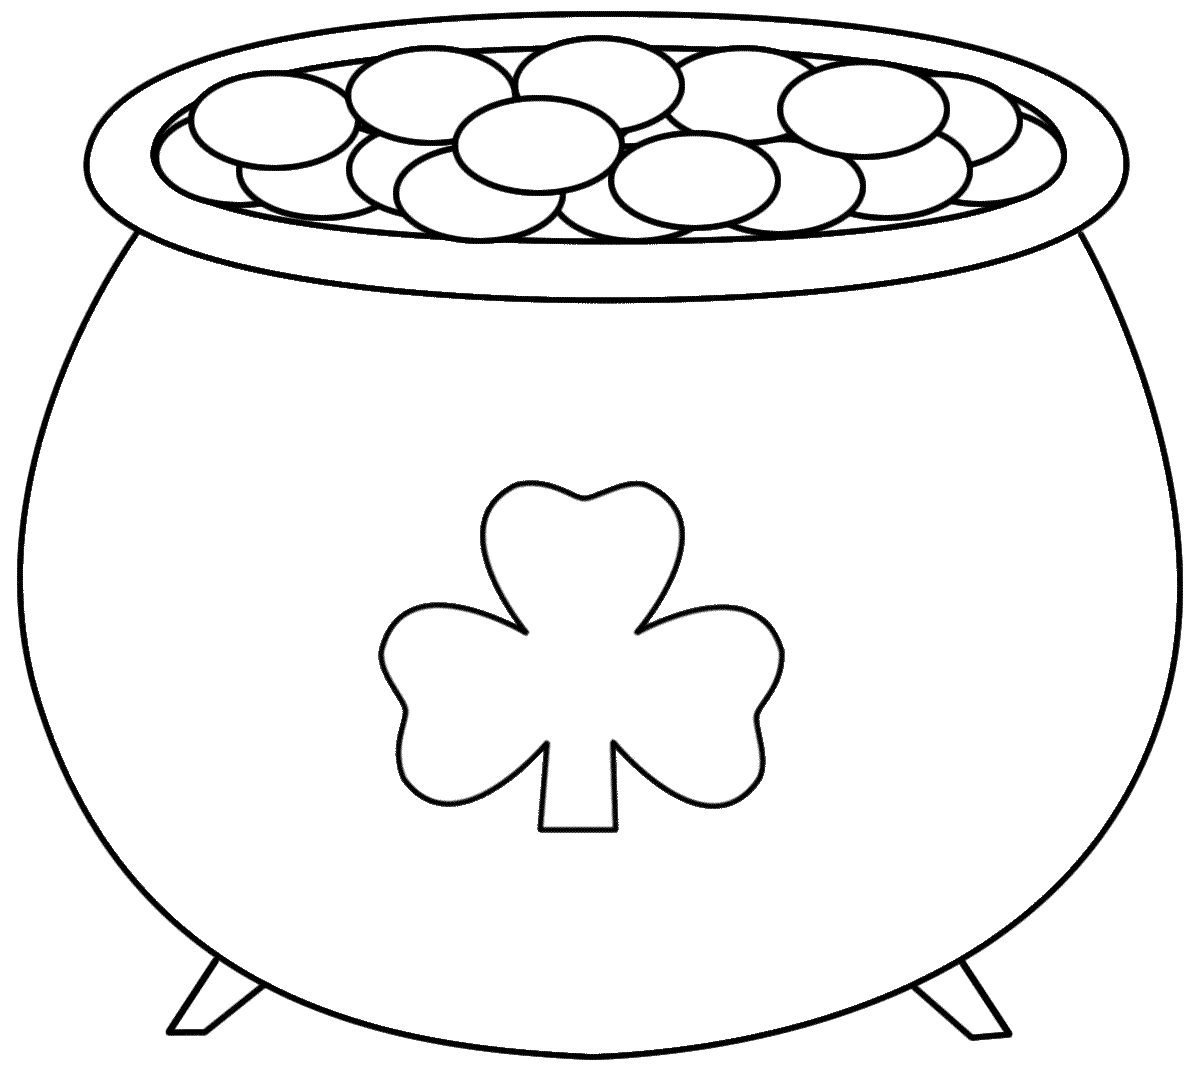 Yo Gaba Gaba - Coloring Pages for Kids and for Adults